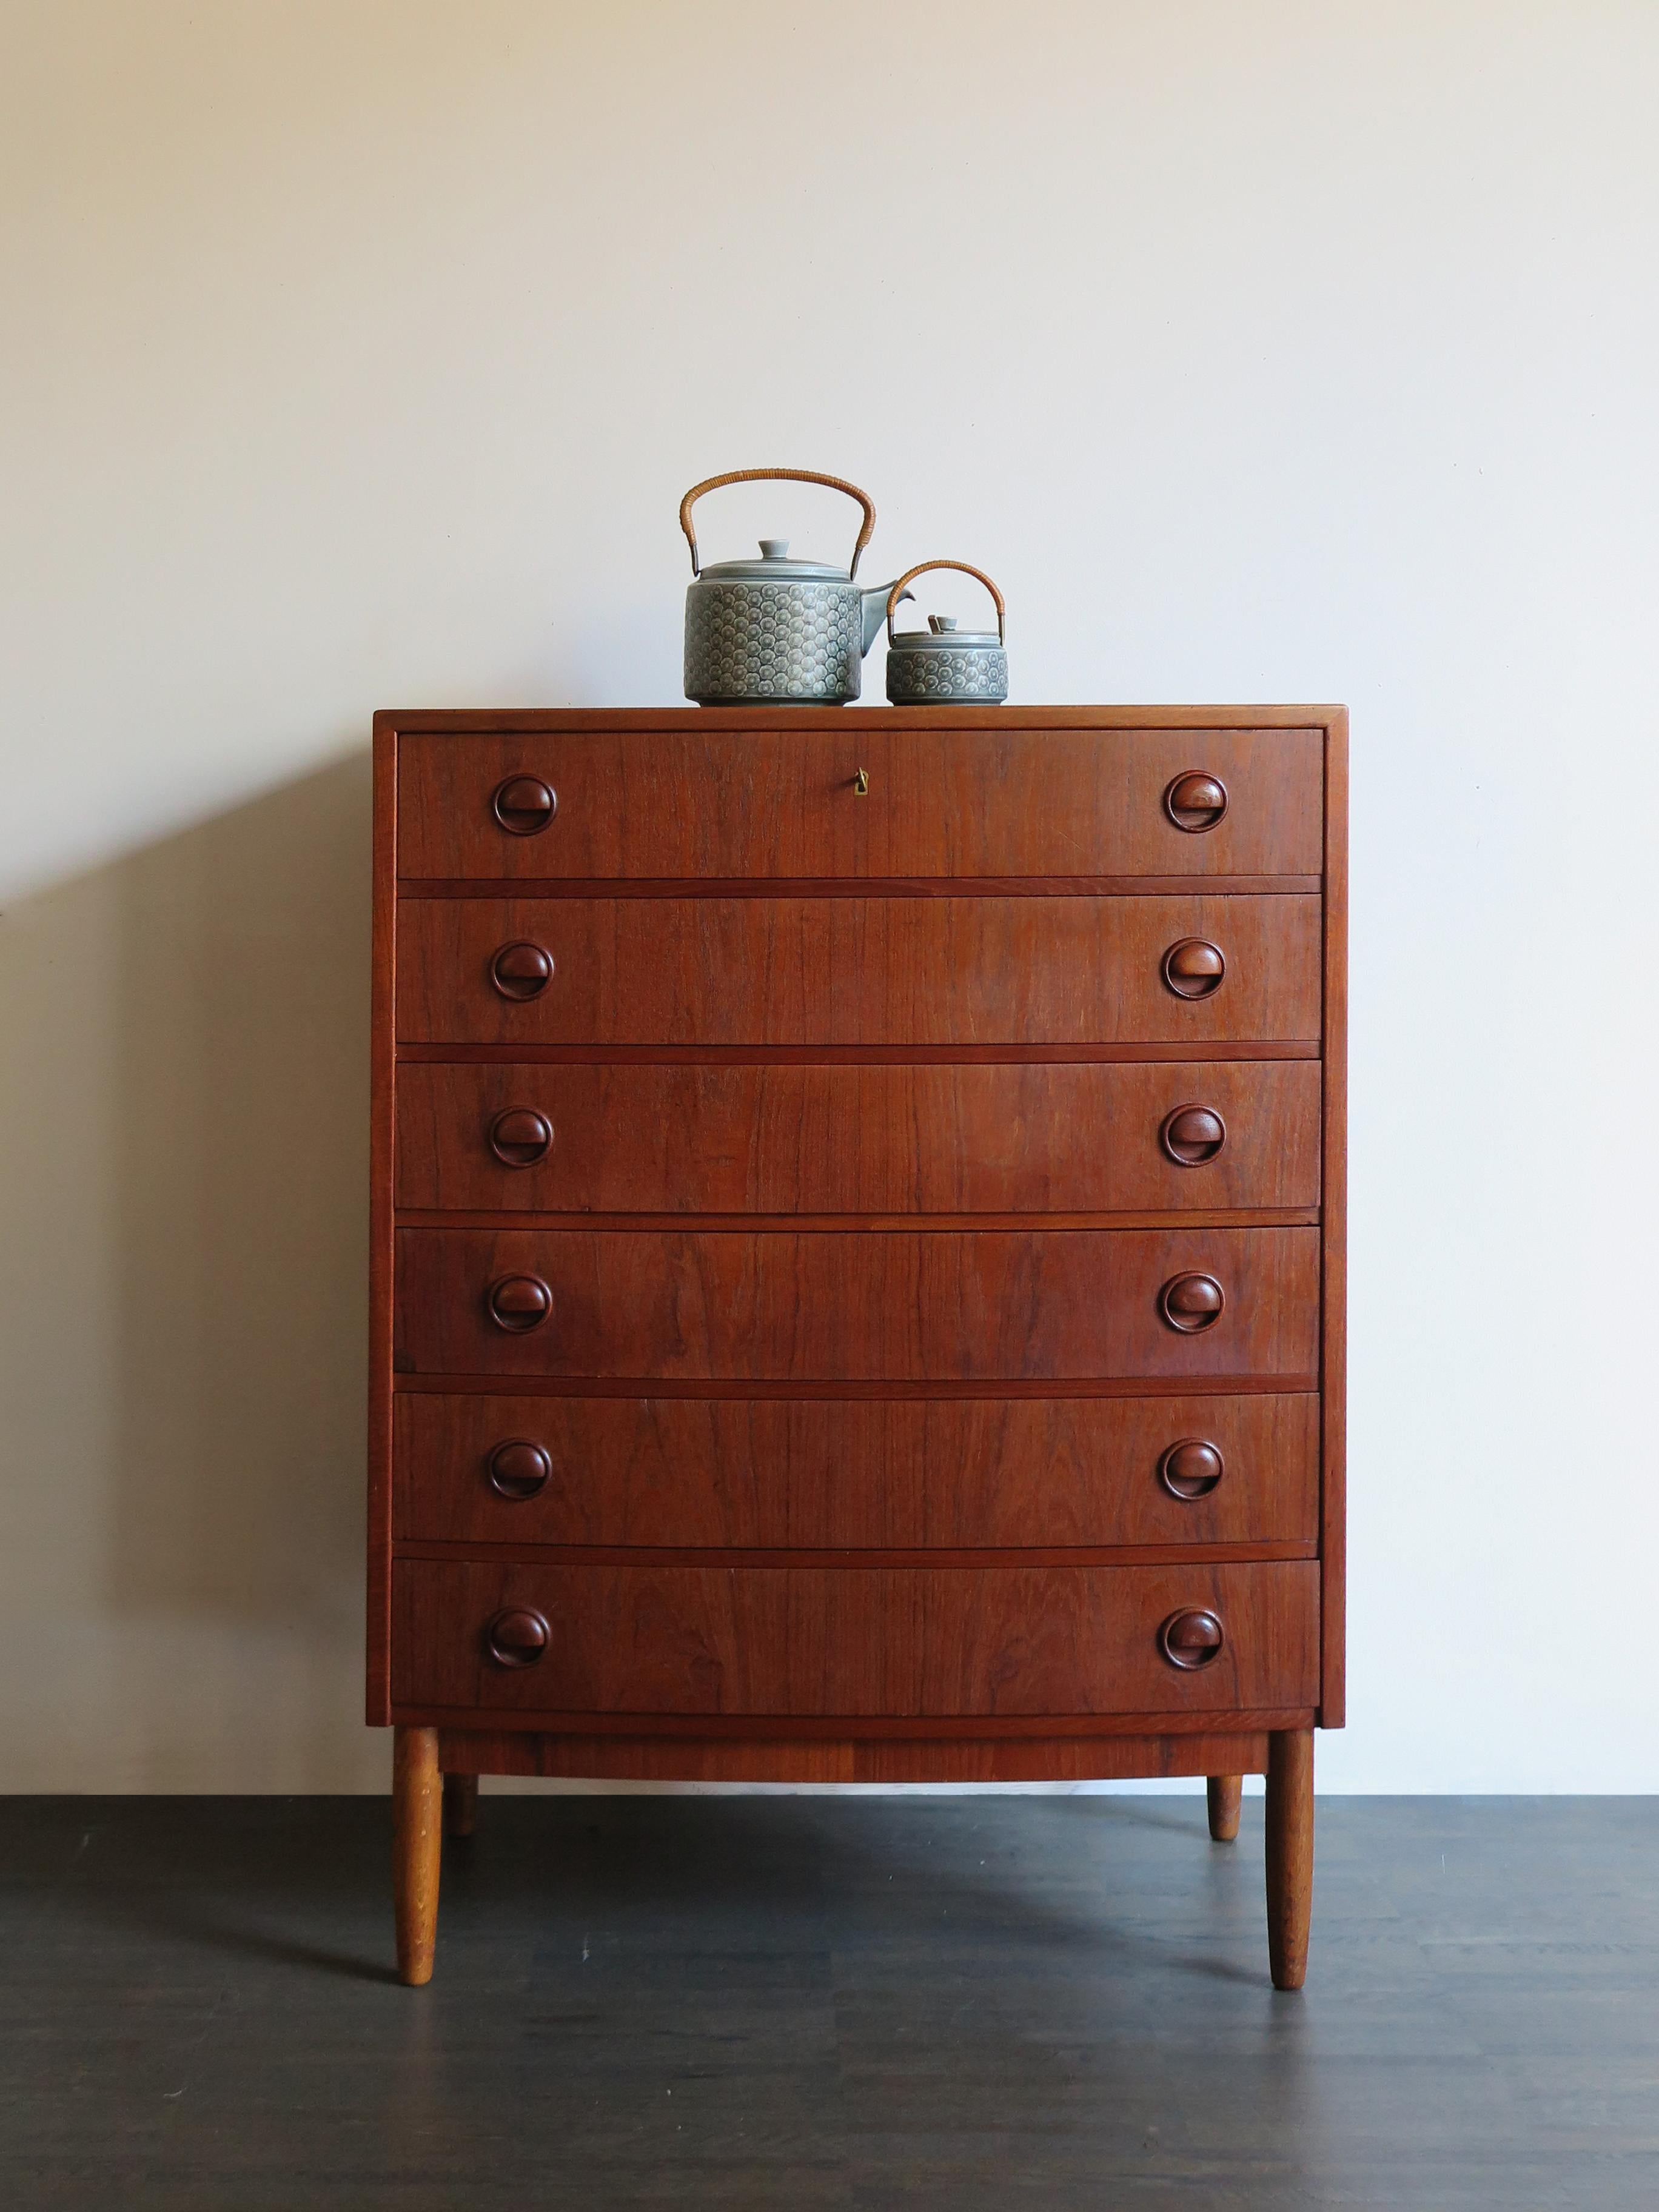 Scandinavian chest of drawers, veneer teak, 1960s.

Please note that the item is original of the period and this shows normal signs of age and use.
 